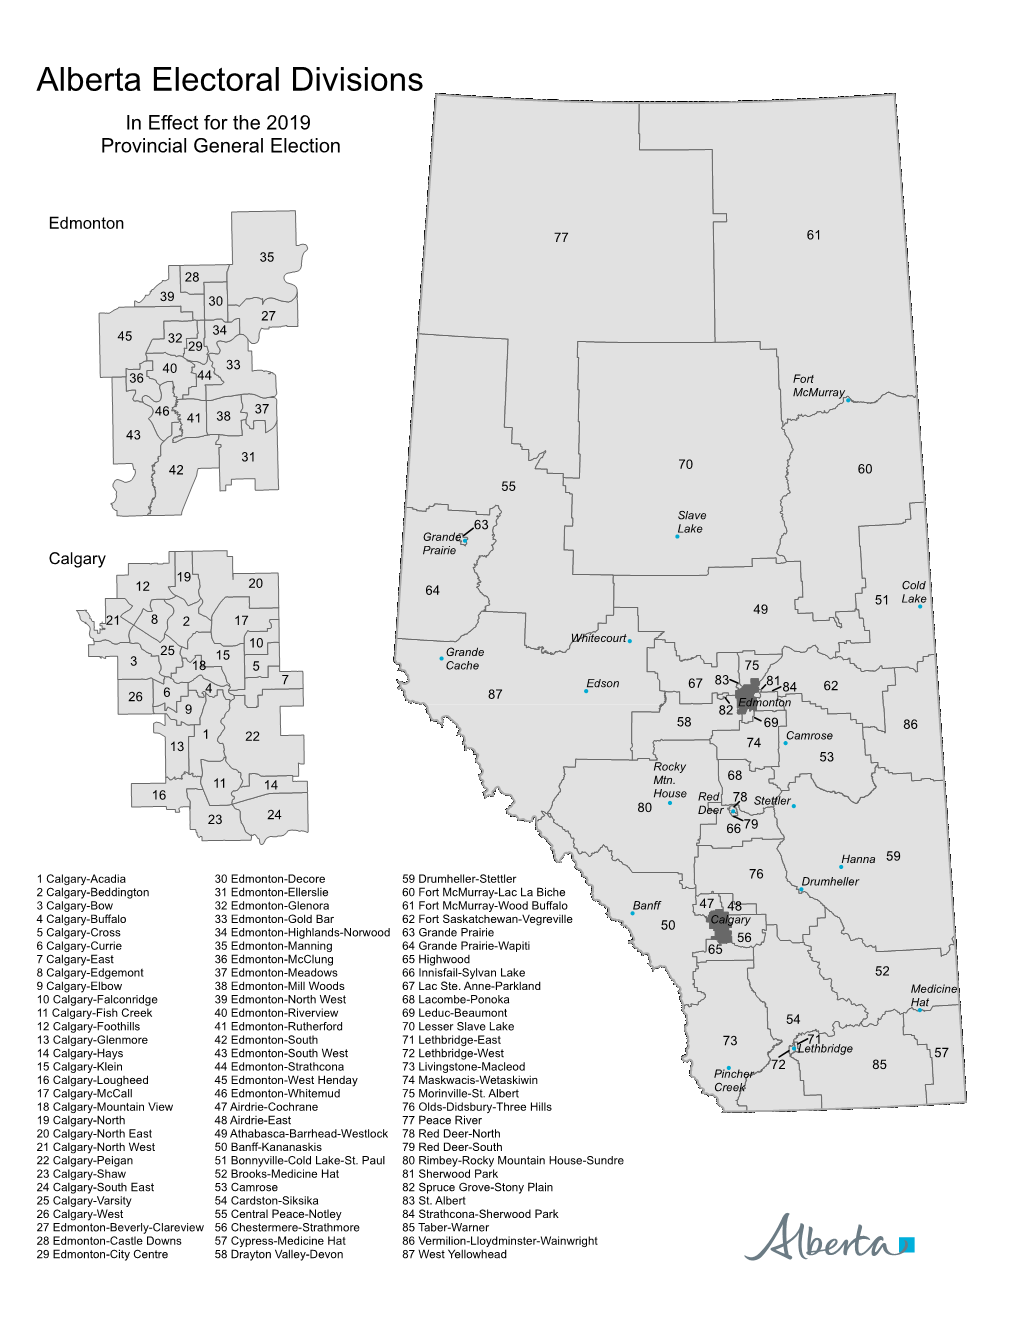 Alberta Electoral Divisions in Effect for the 2019 Provincial General Election